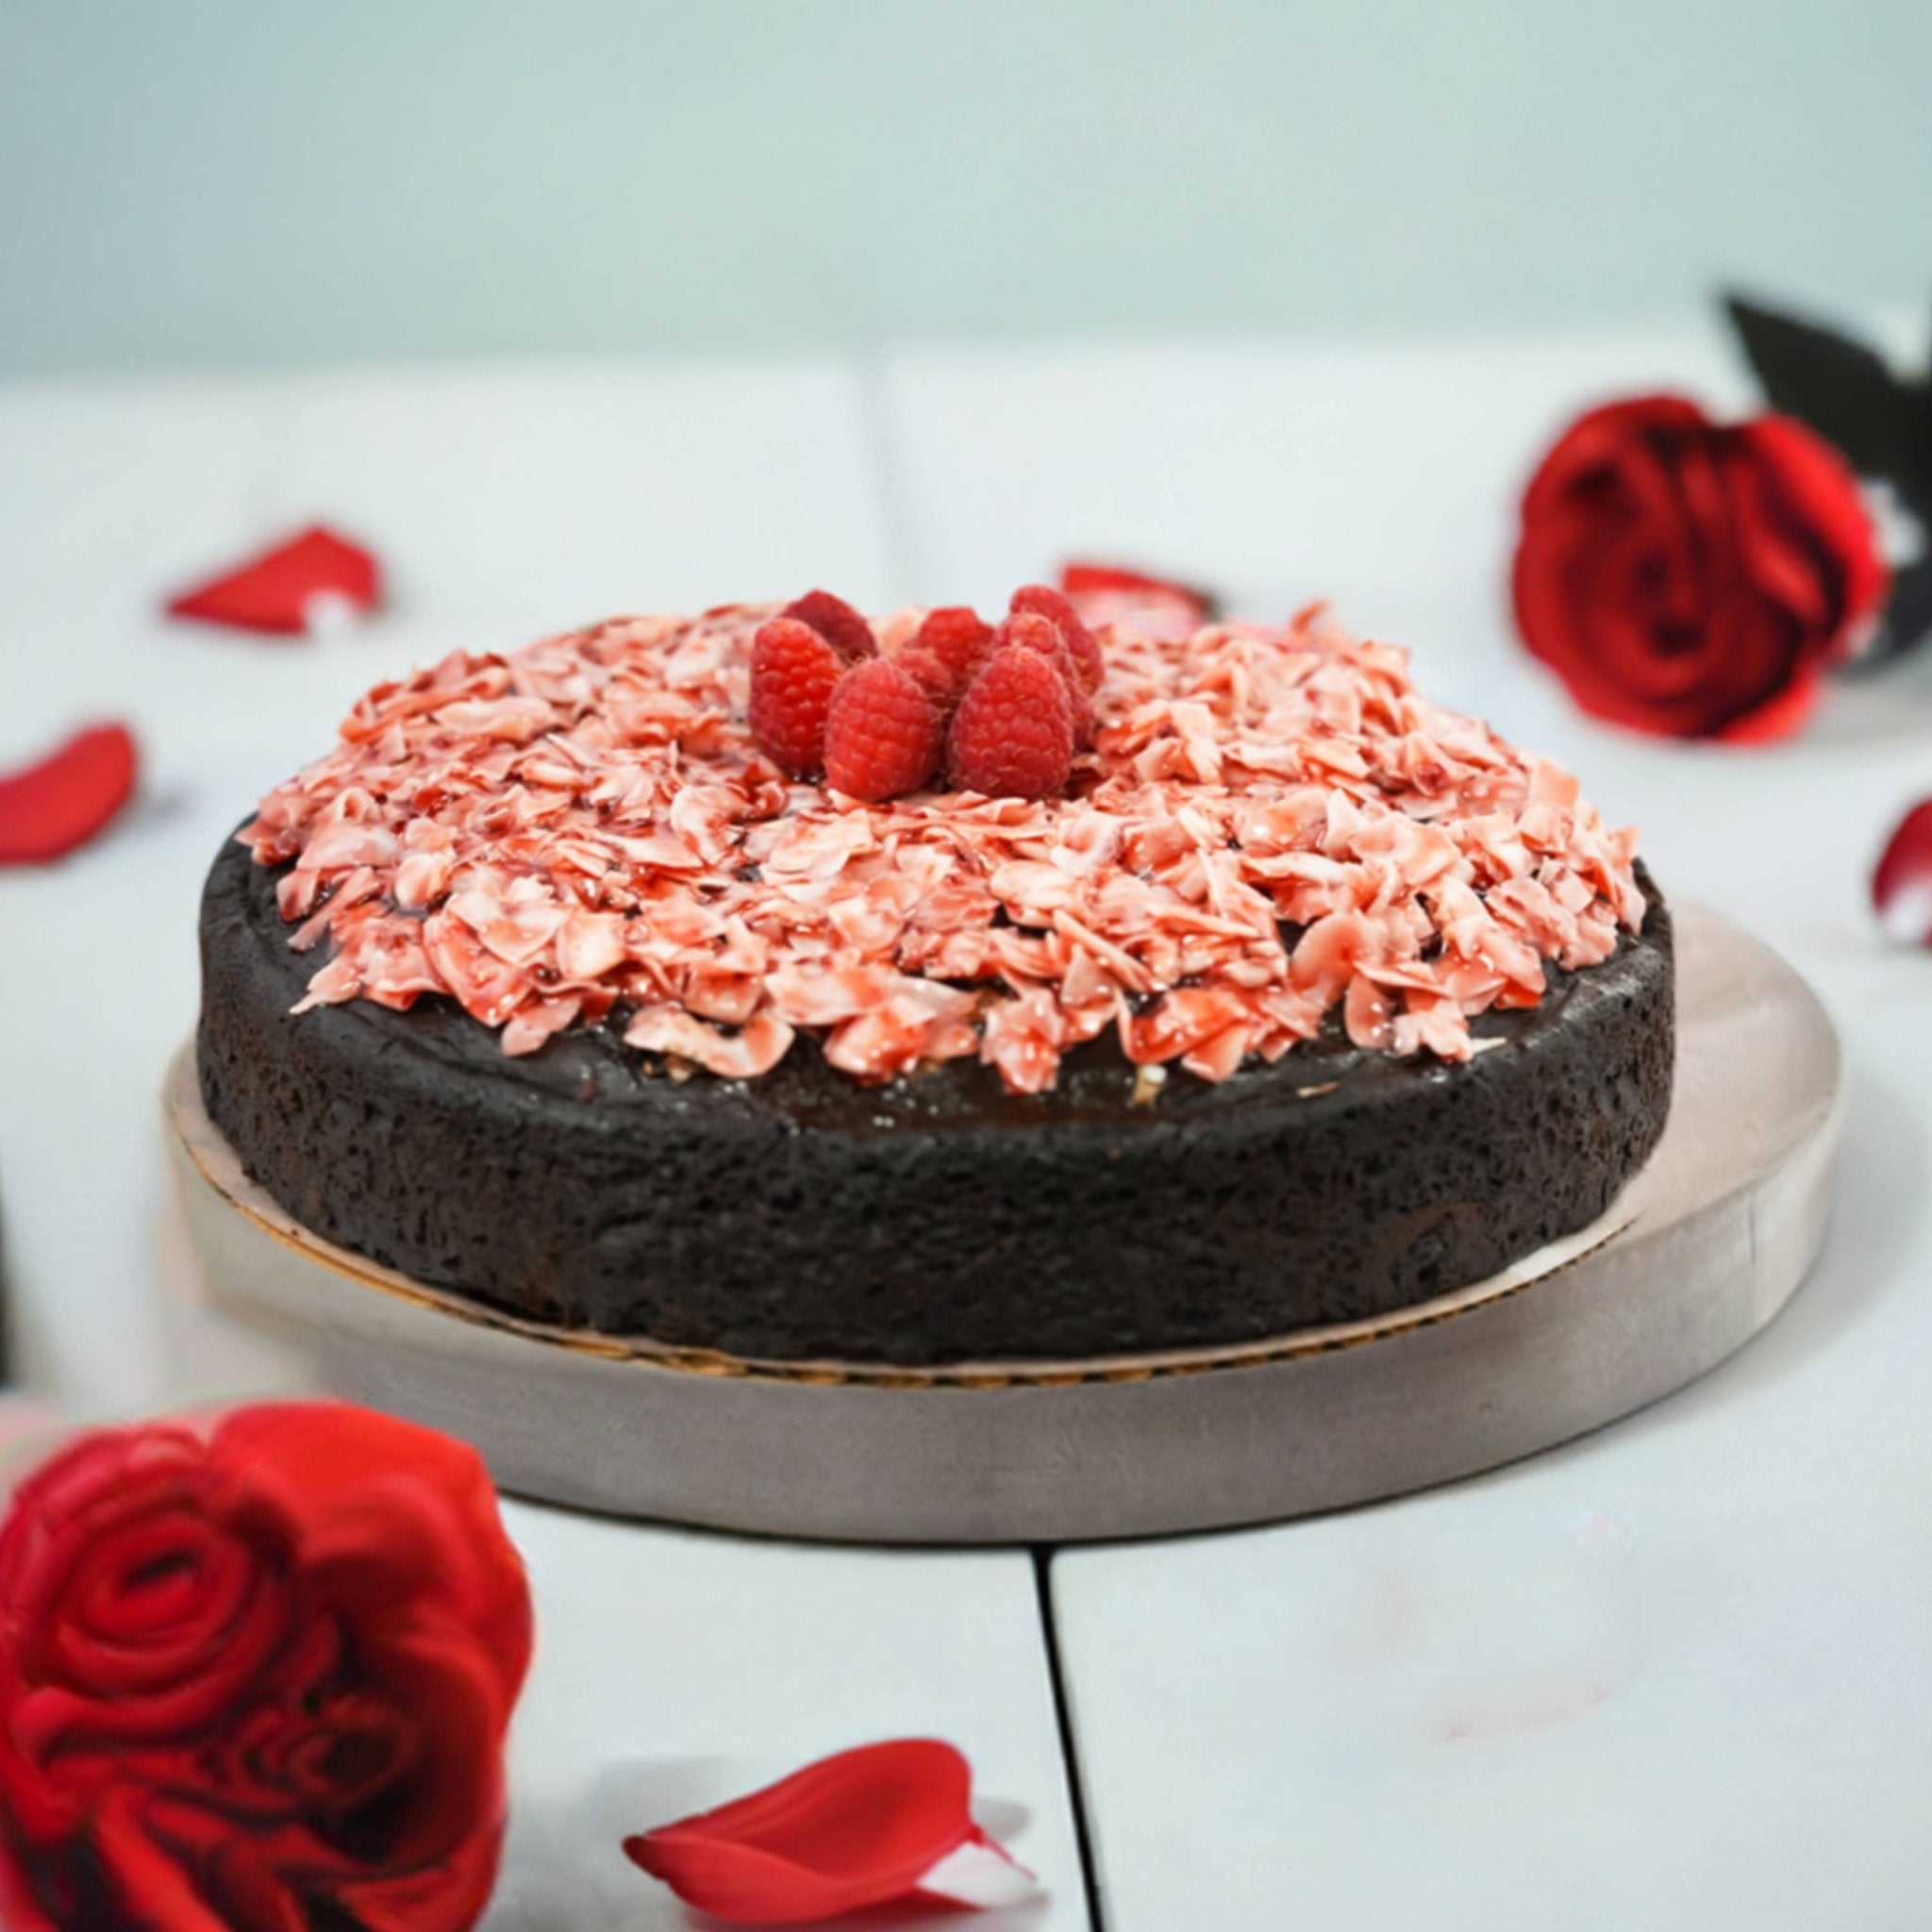 Andy Anand Sugar Free Exquisite 9" Raspberry Chocolate Coconut Cake 9" with Real Chocolate Truffles